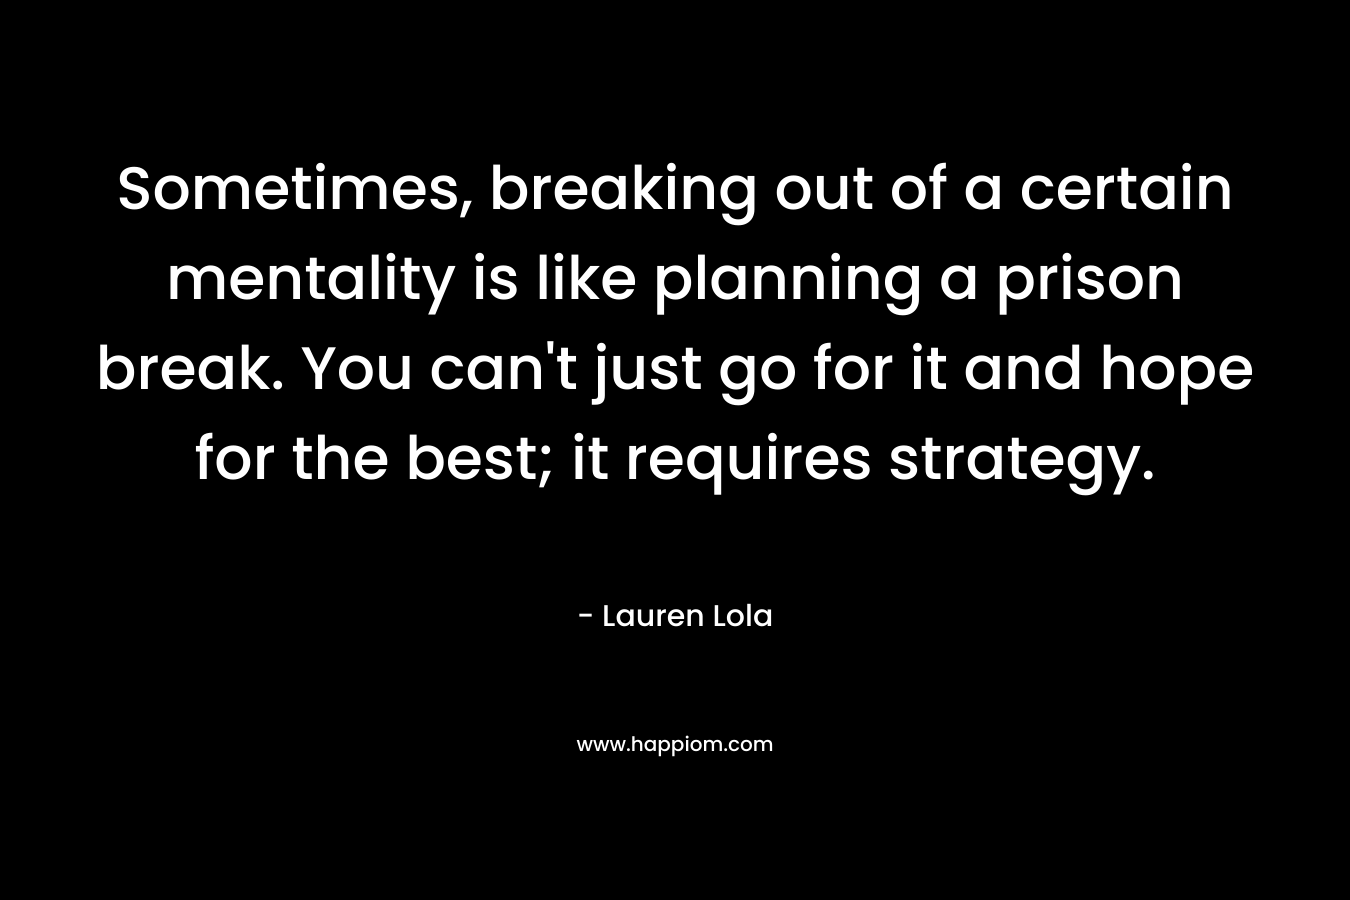 Sometimes, breaking out of a certain mentality is like planning a prison break. You can't just go for it and hope for the best; it requires strategy.